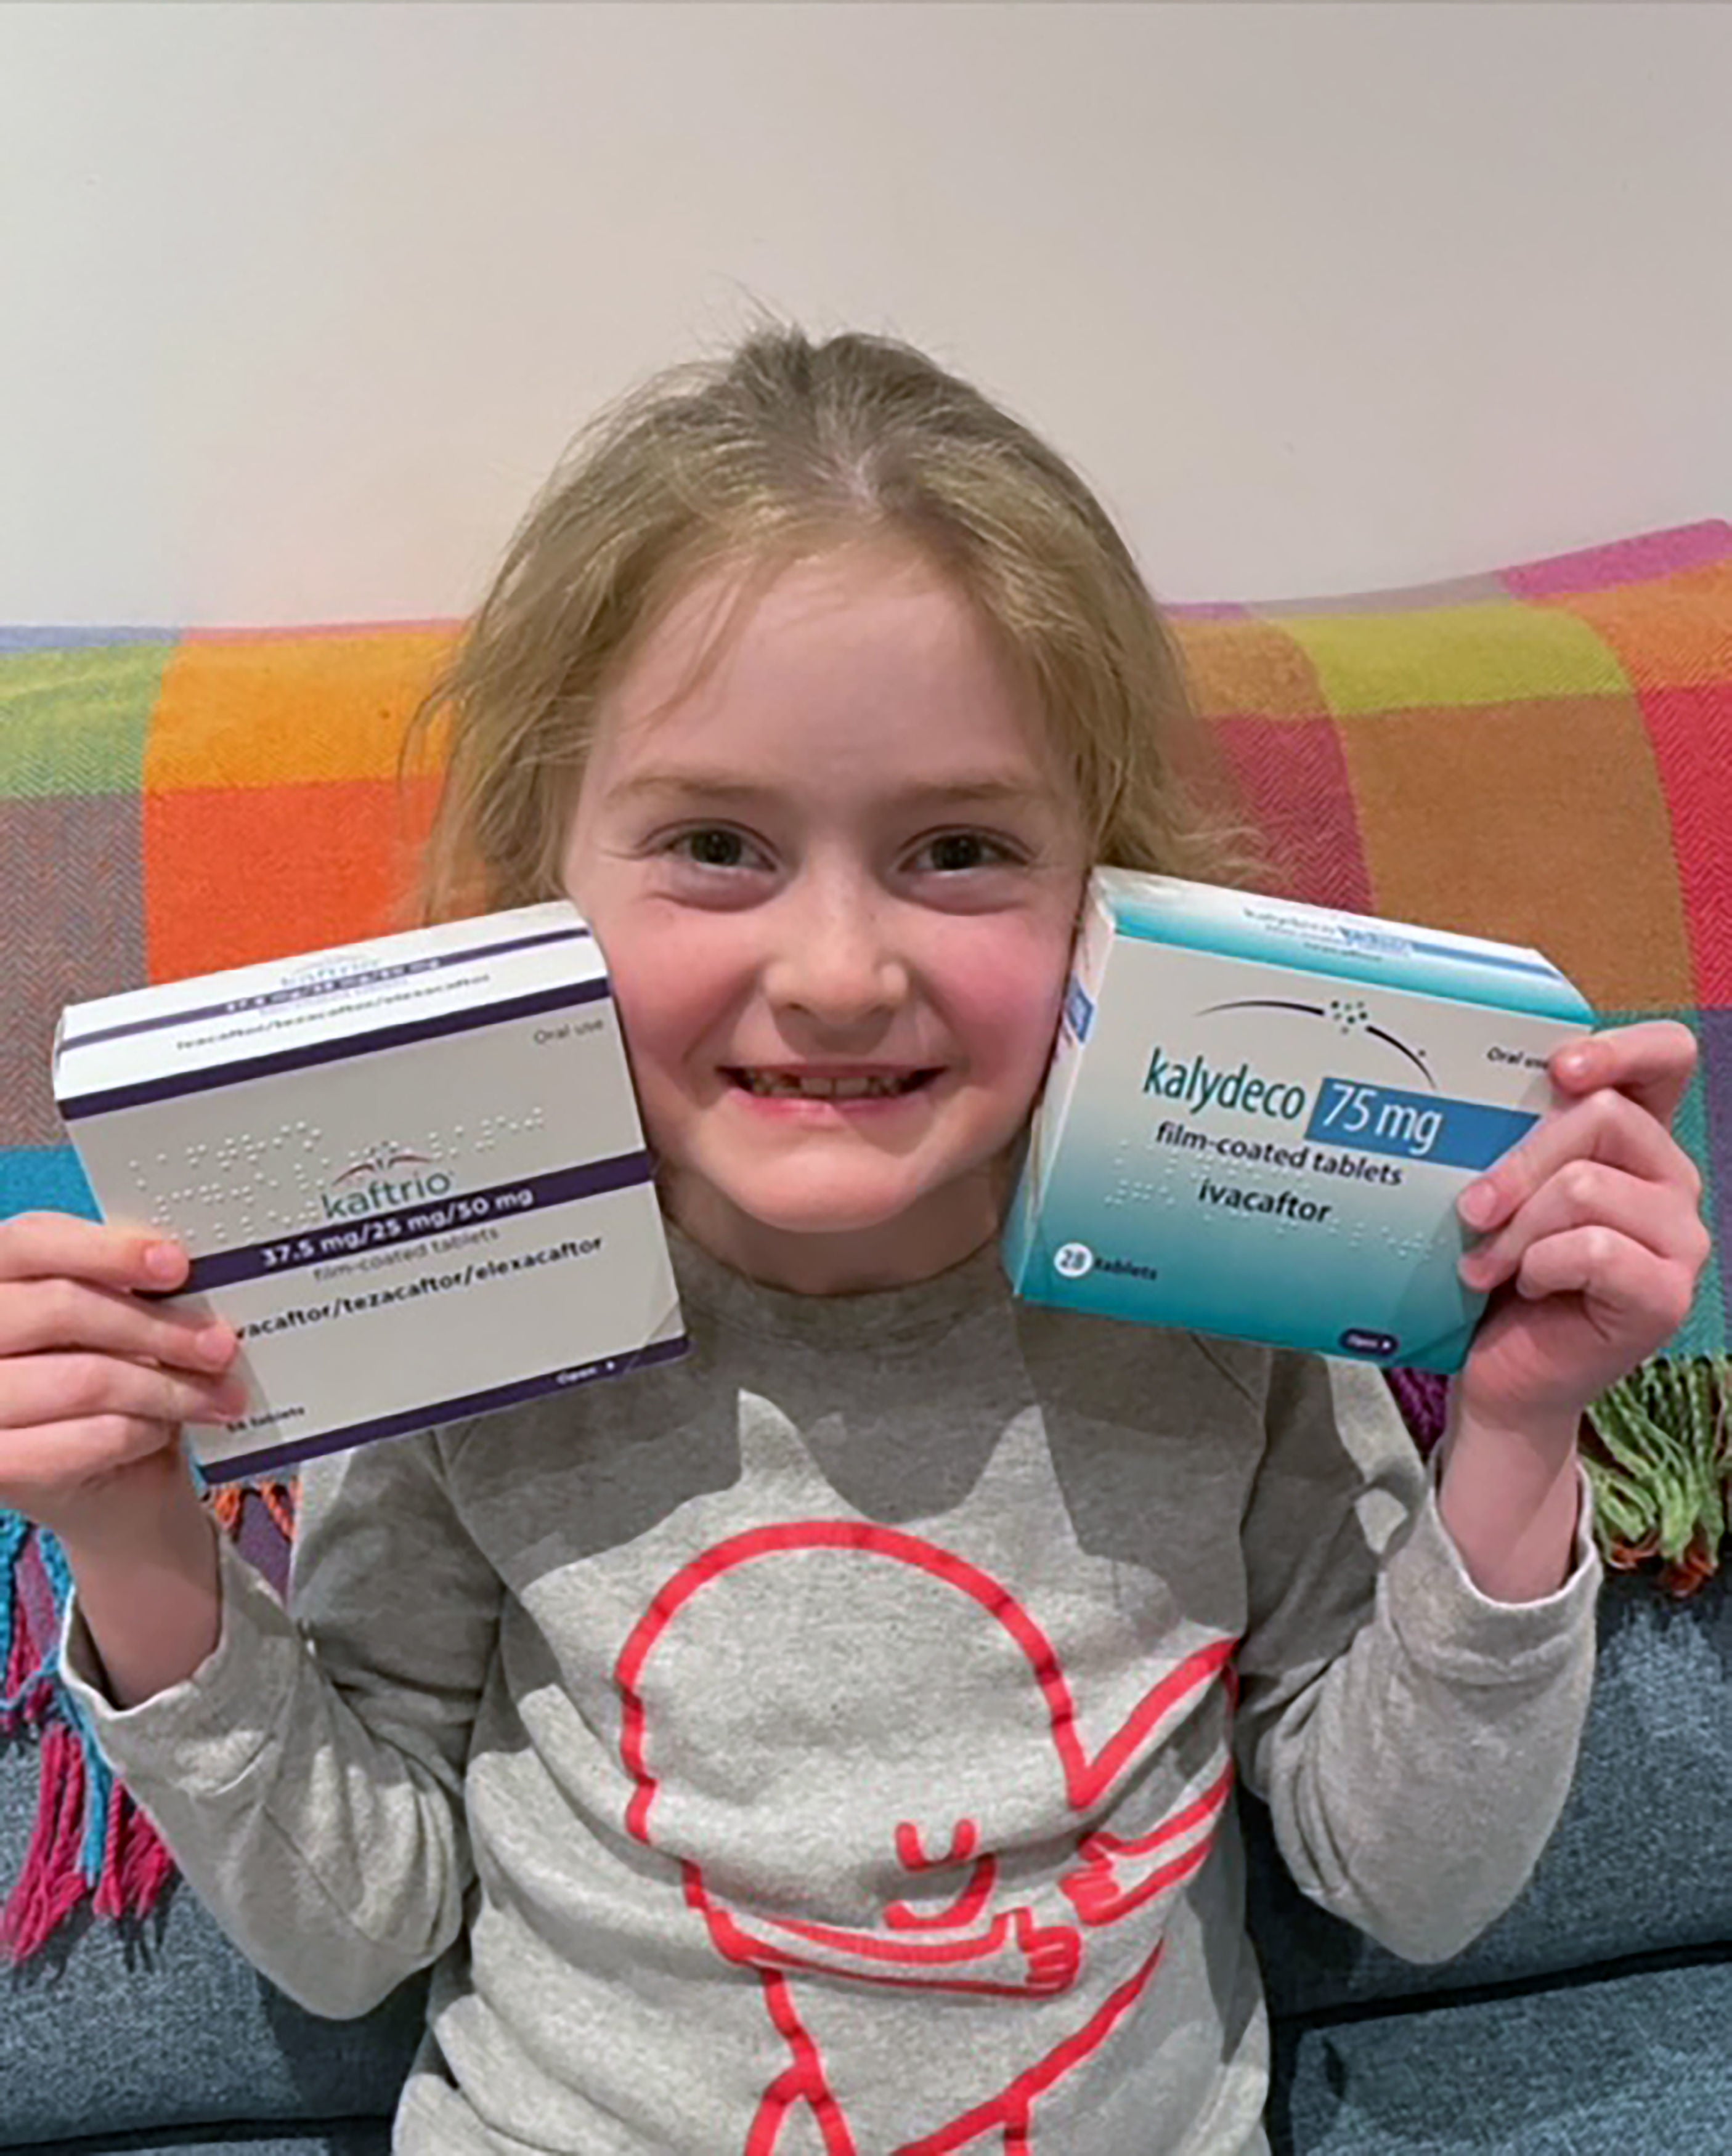 Kate Farrer, 7, who is one of the first young children to be given Kaftrio on the NHS to treat cystic fibrosis